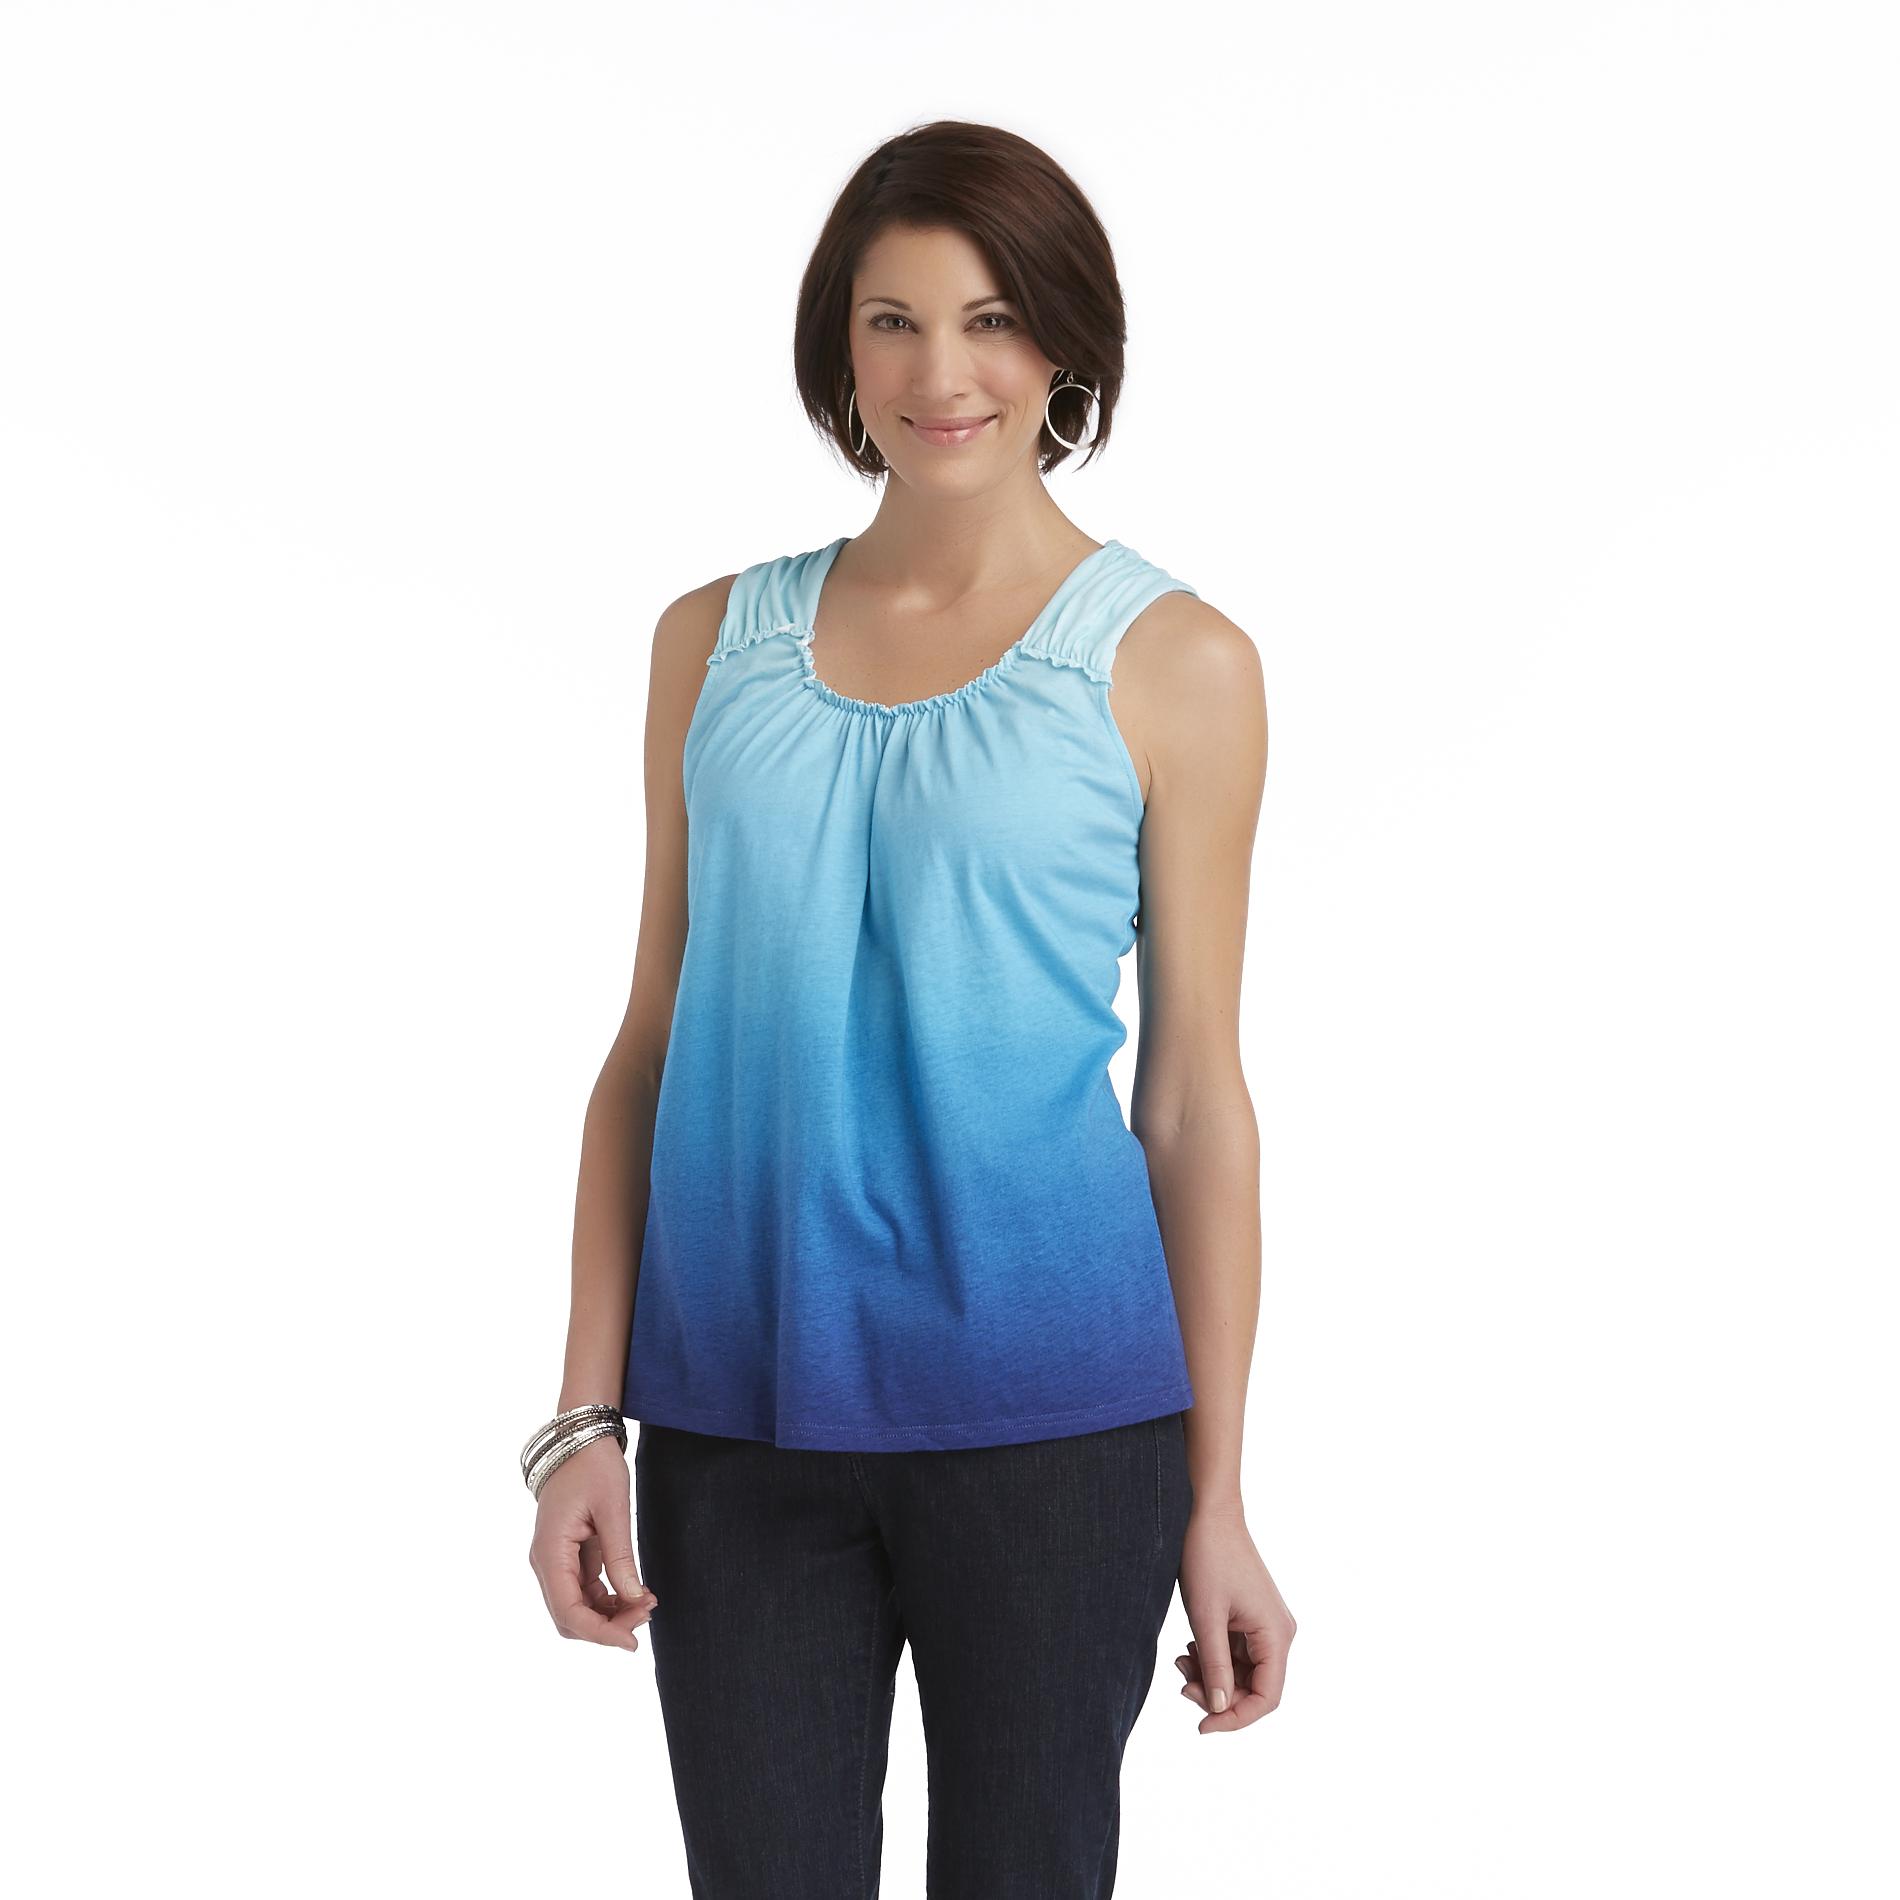 Basic Editions Women's Ruched Shoulder Tank Top - Dip Dye